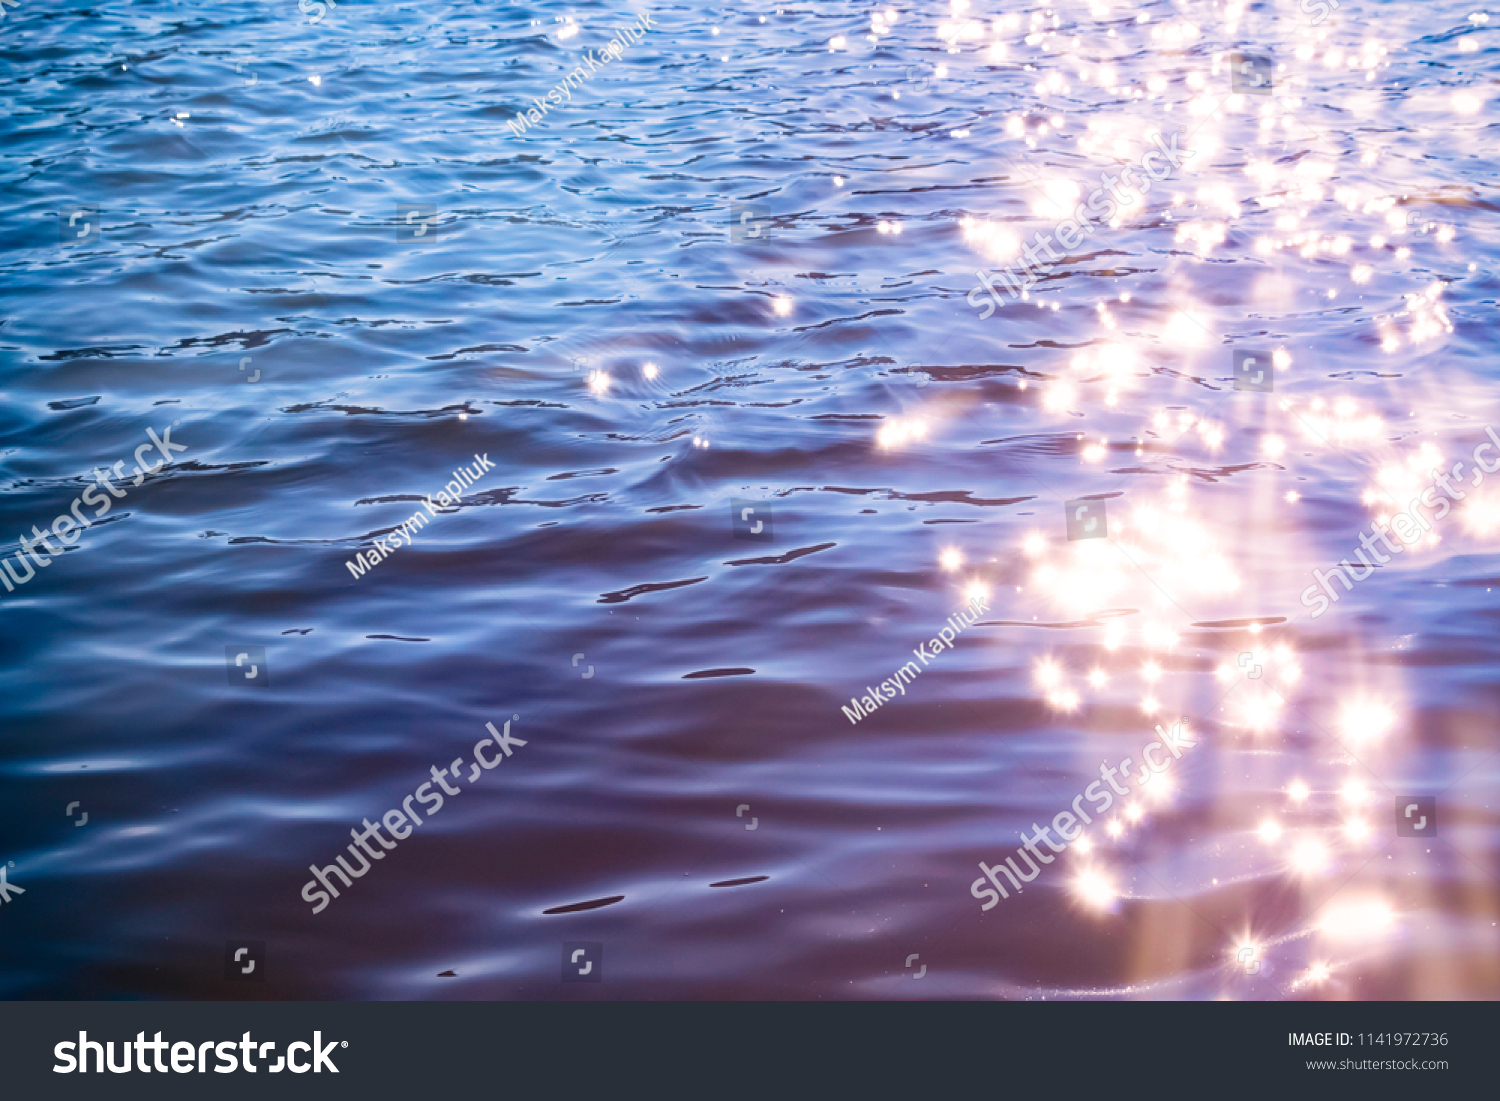 Sunlight twinkling off river water with small waves. Calm summer evening. Colorful background #1141972736